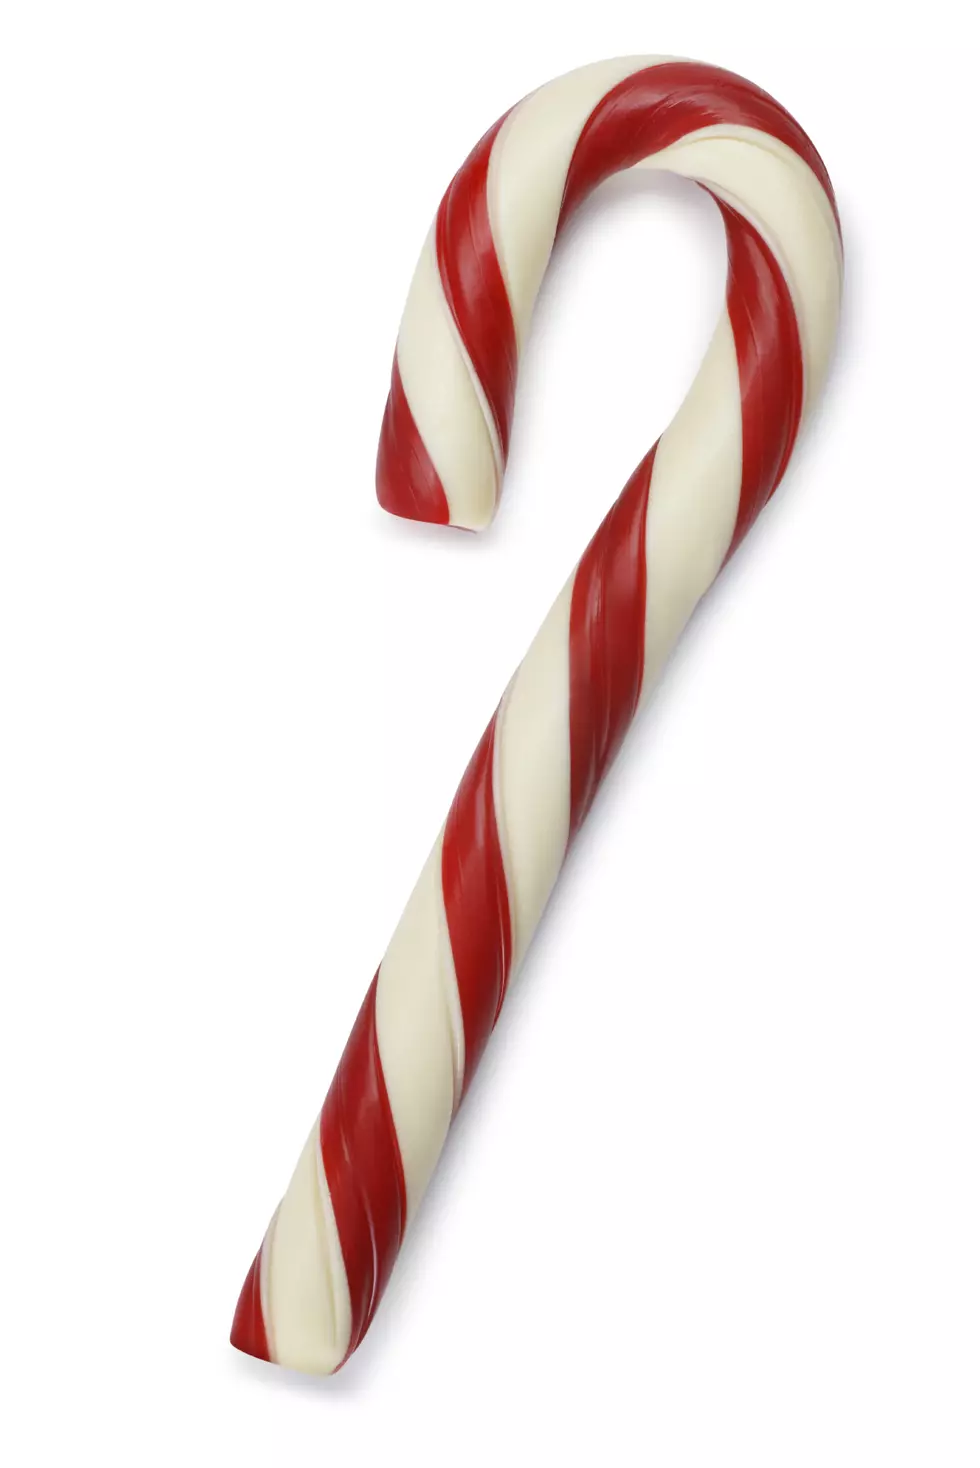 A &#8220;Big&#8221; Yes or No to Candy Canes